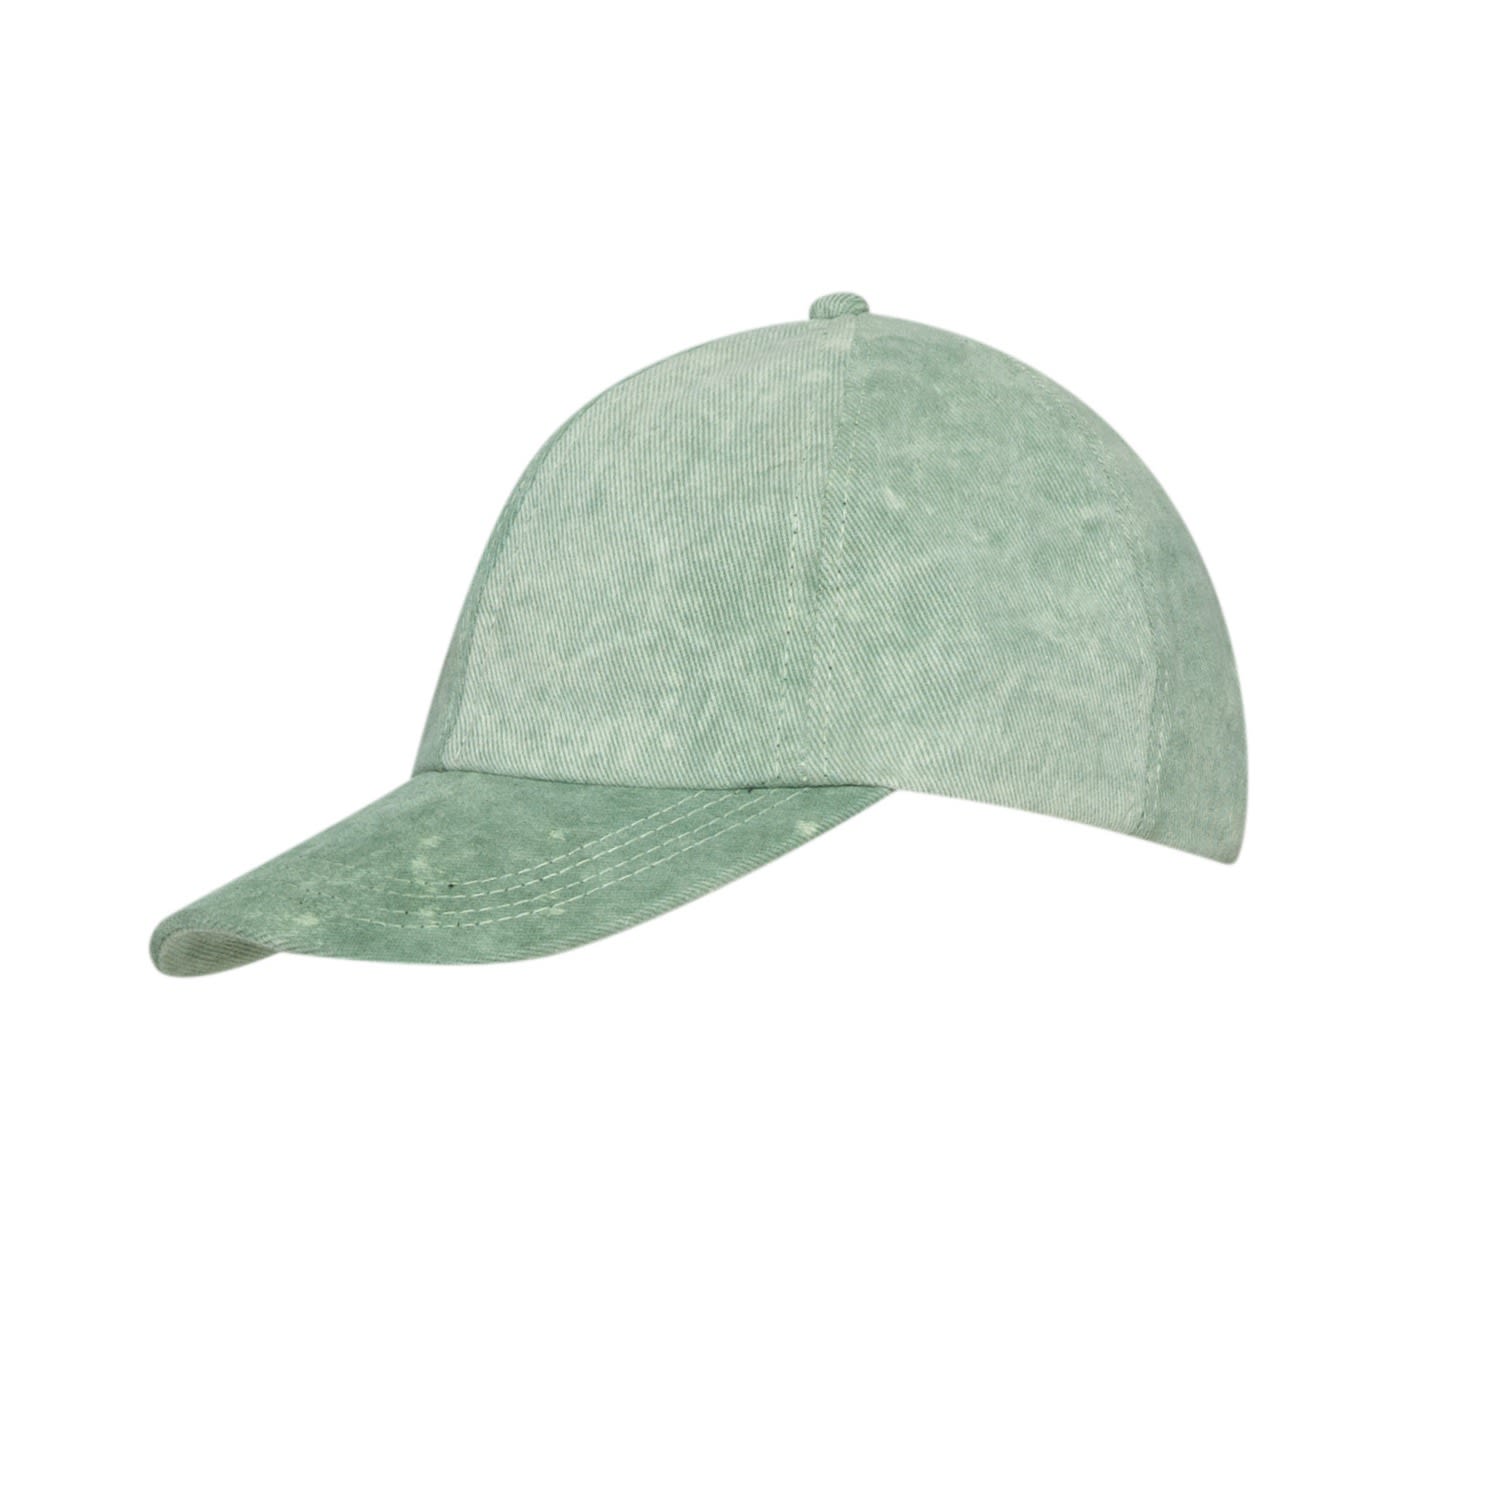 State Of Georgia Women's Green The Baseball Cap Adjustable - Stone Washed Sage